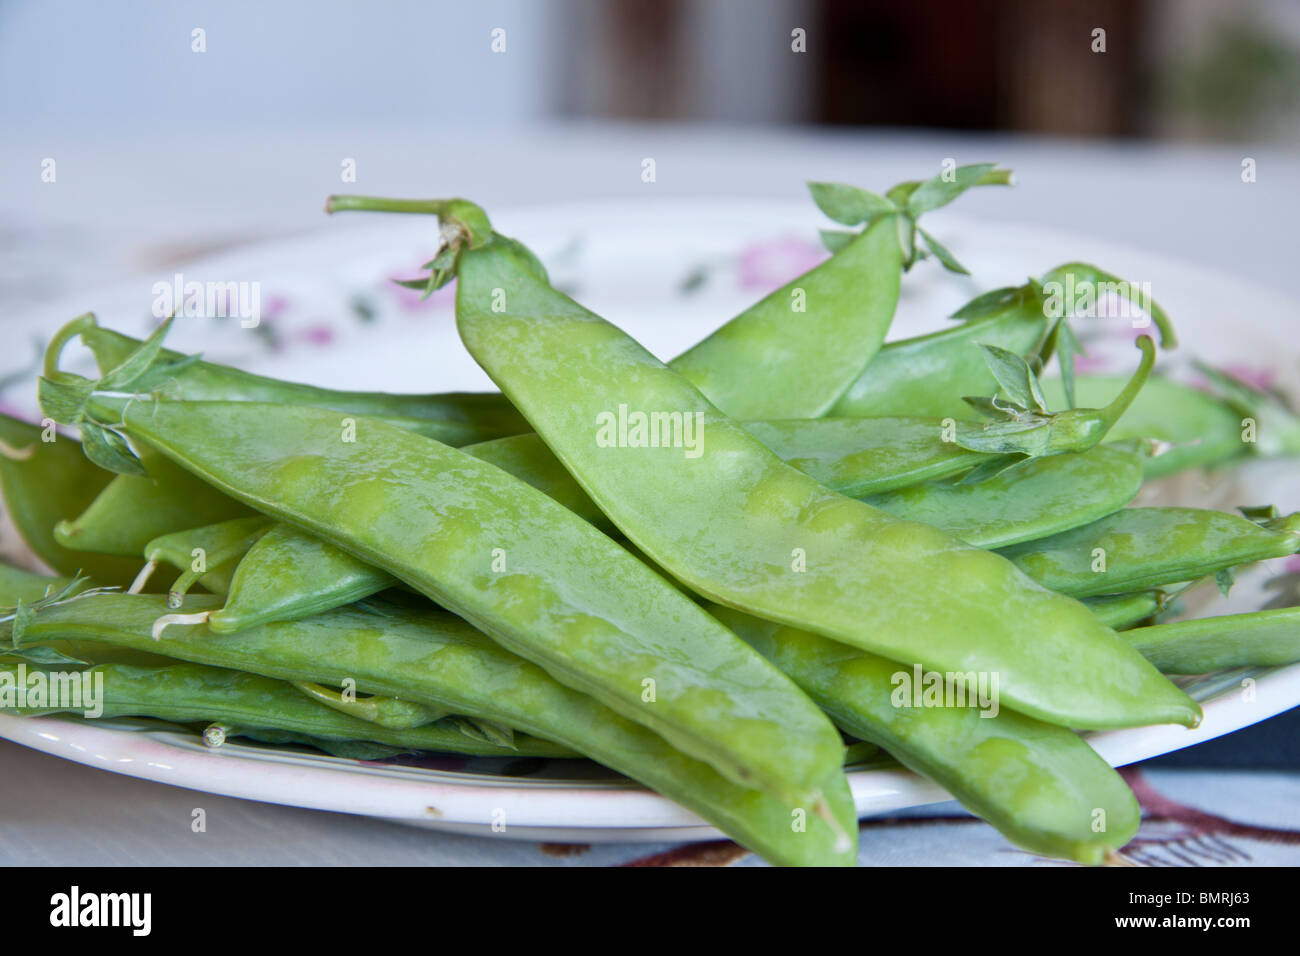 fresh green snow peas freshly picked placed on a plate. Stock Photo